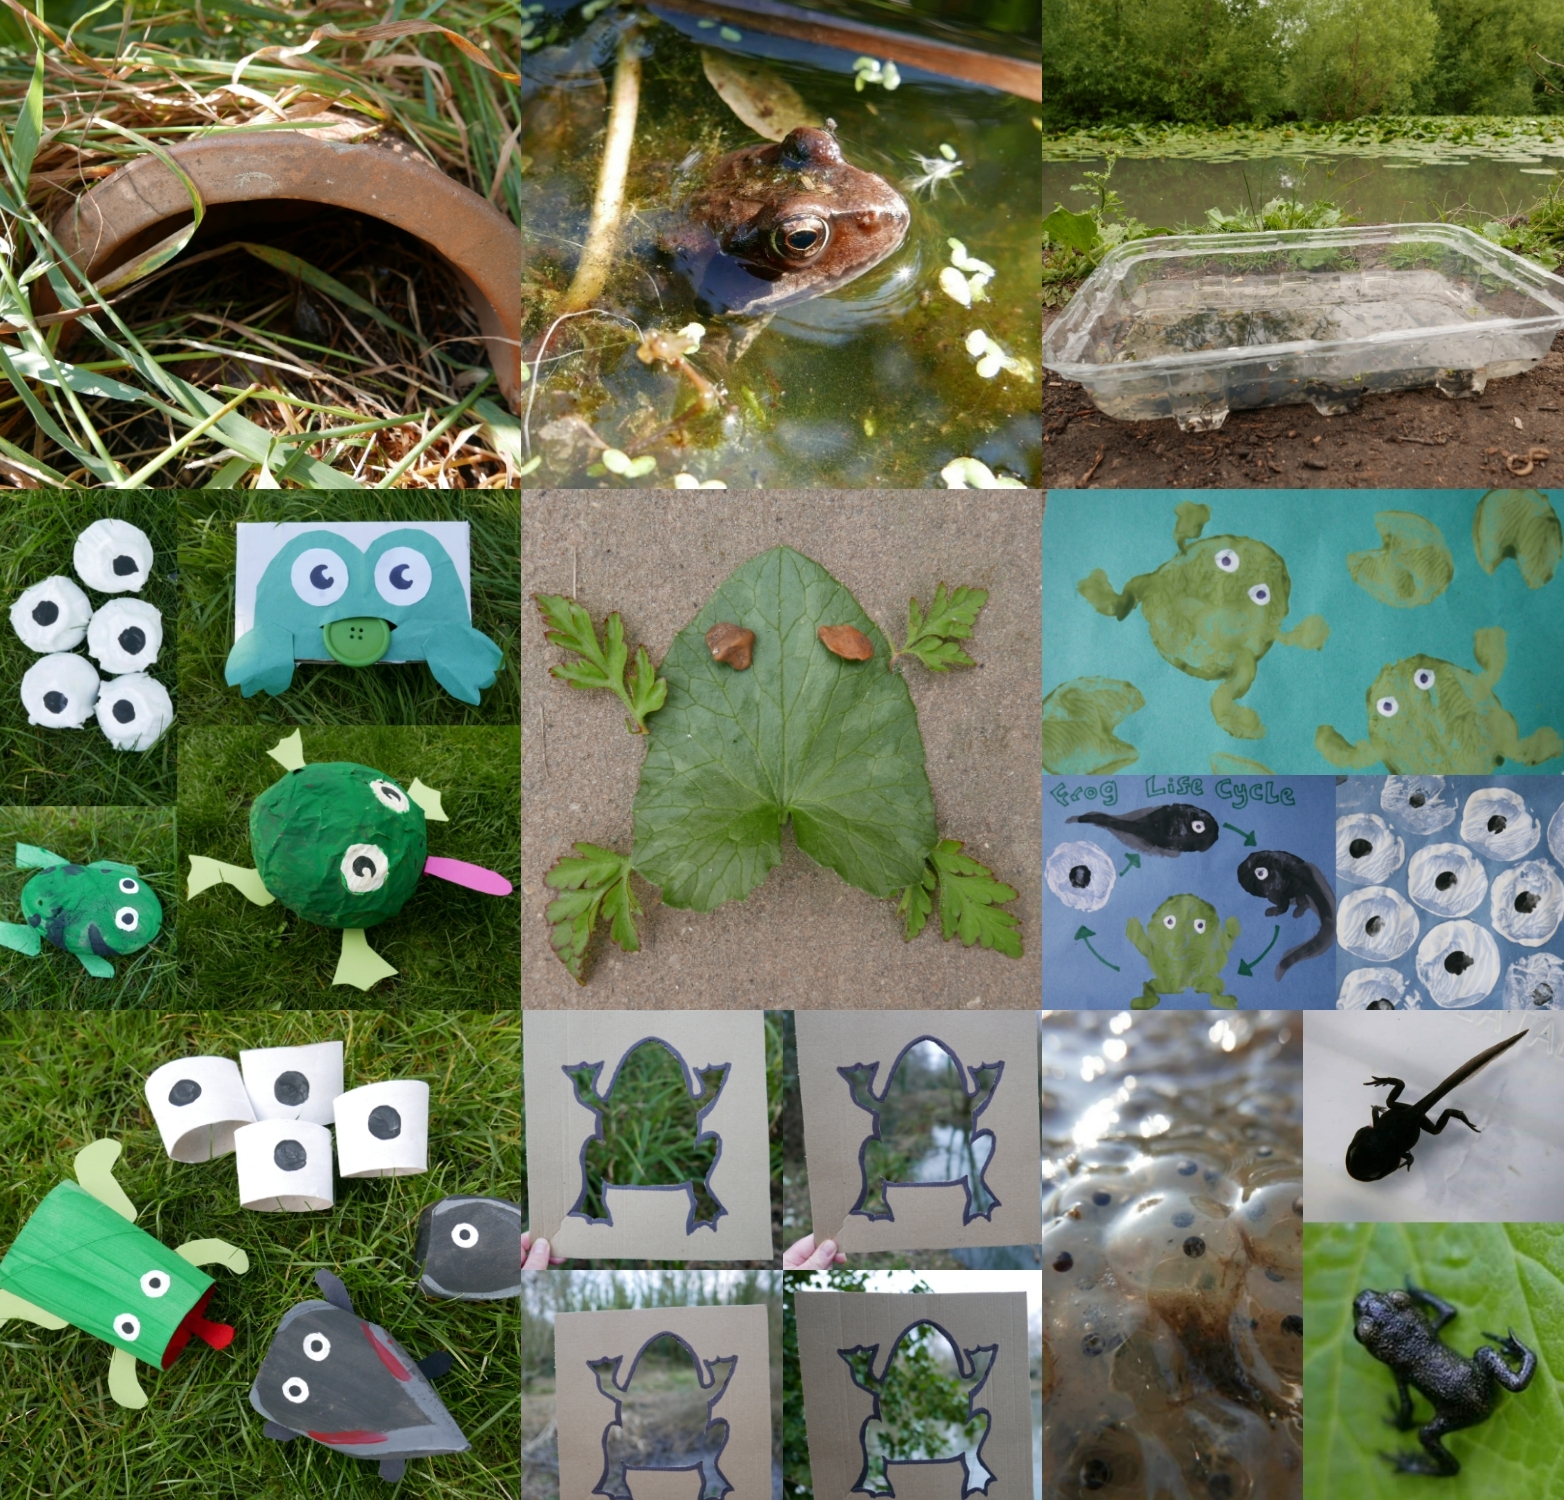 16 Frog activity ideas + fun facts – Childsplayabc ~ Nature is our